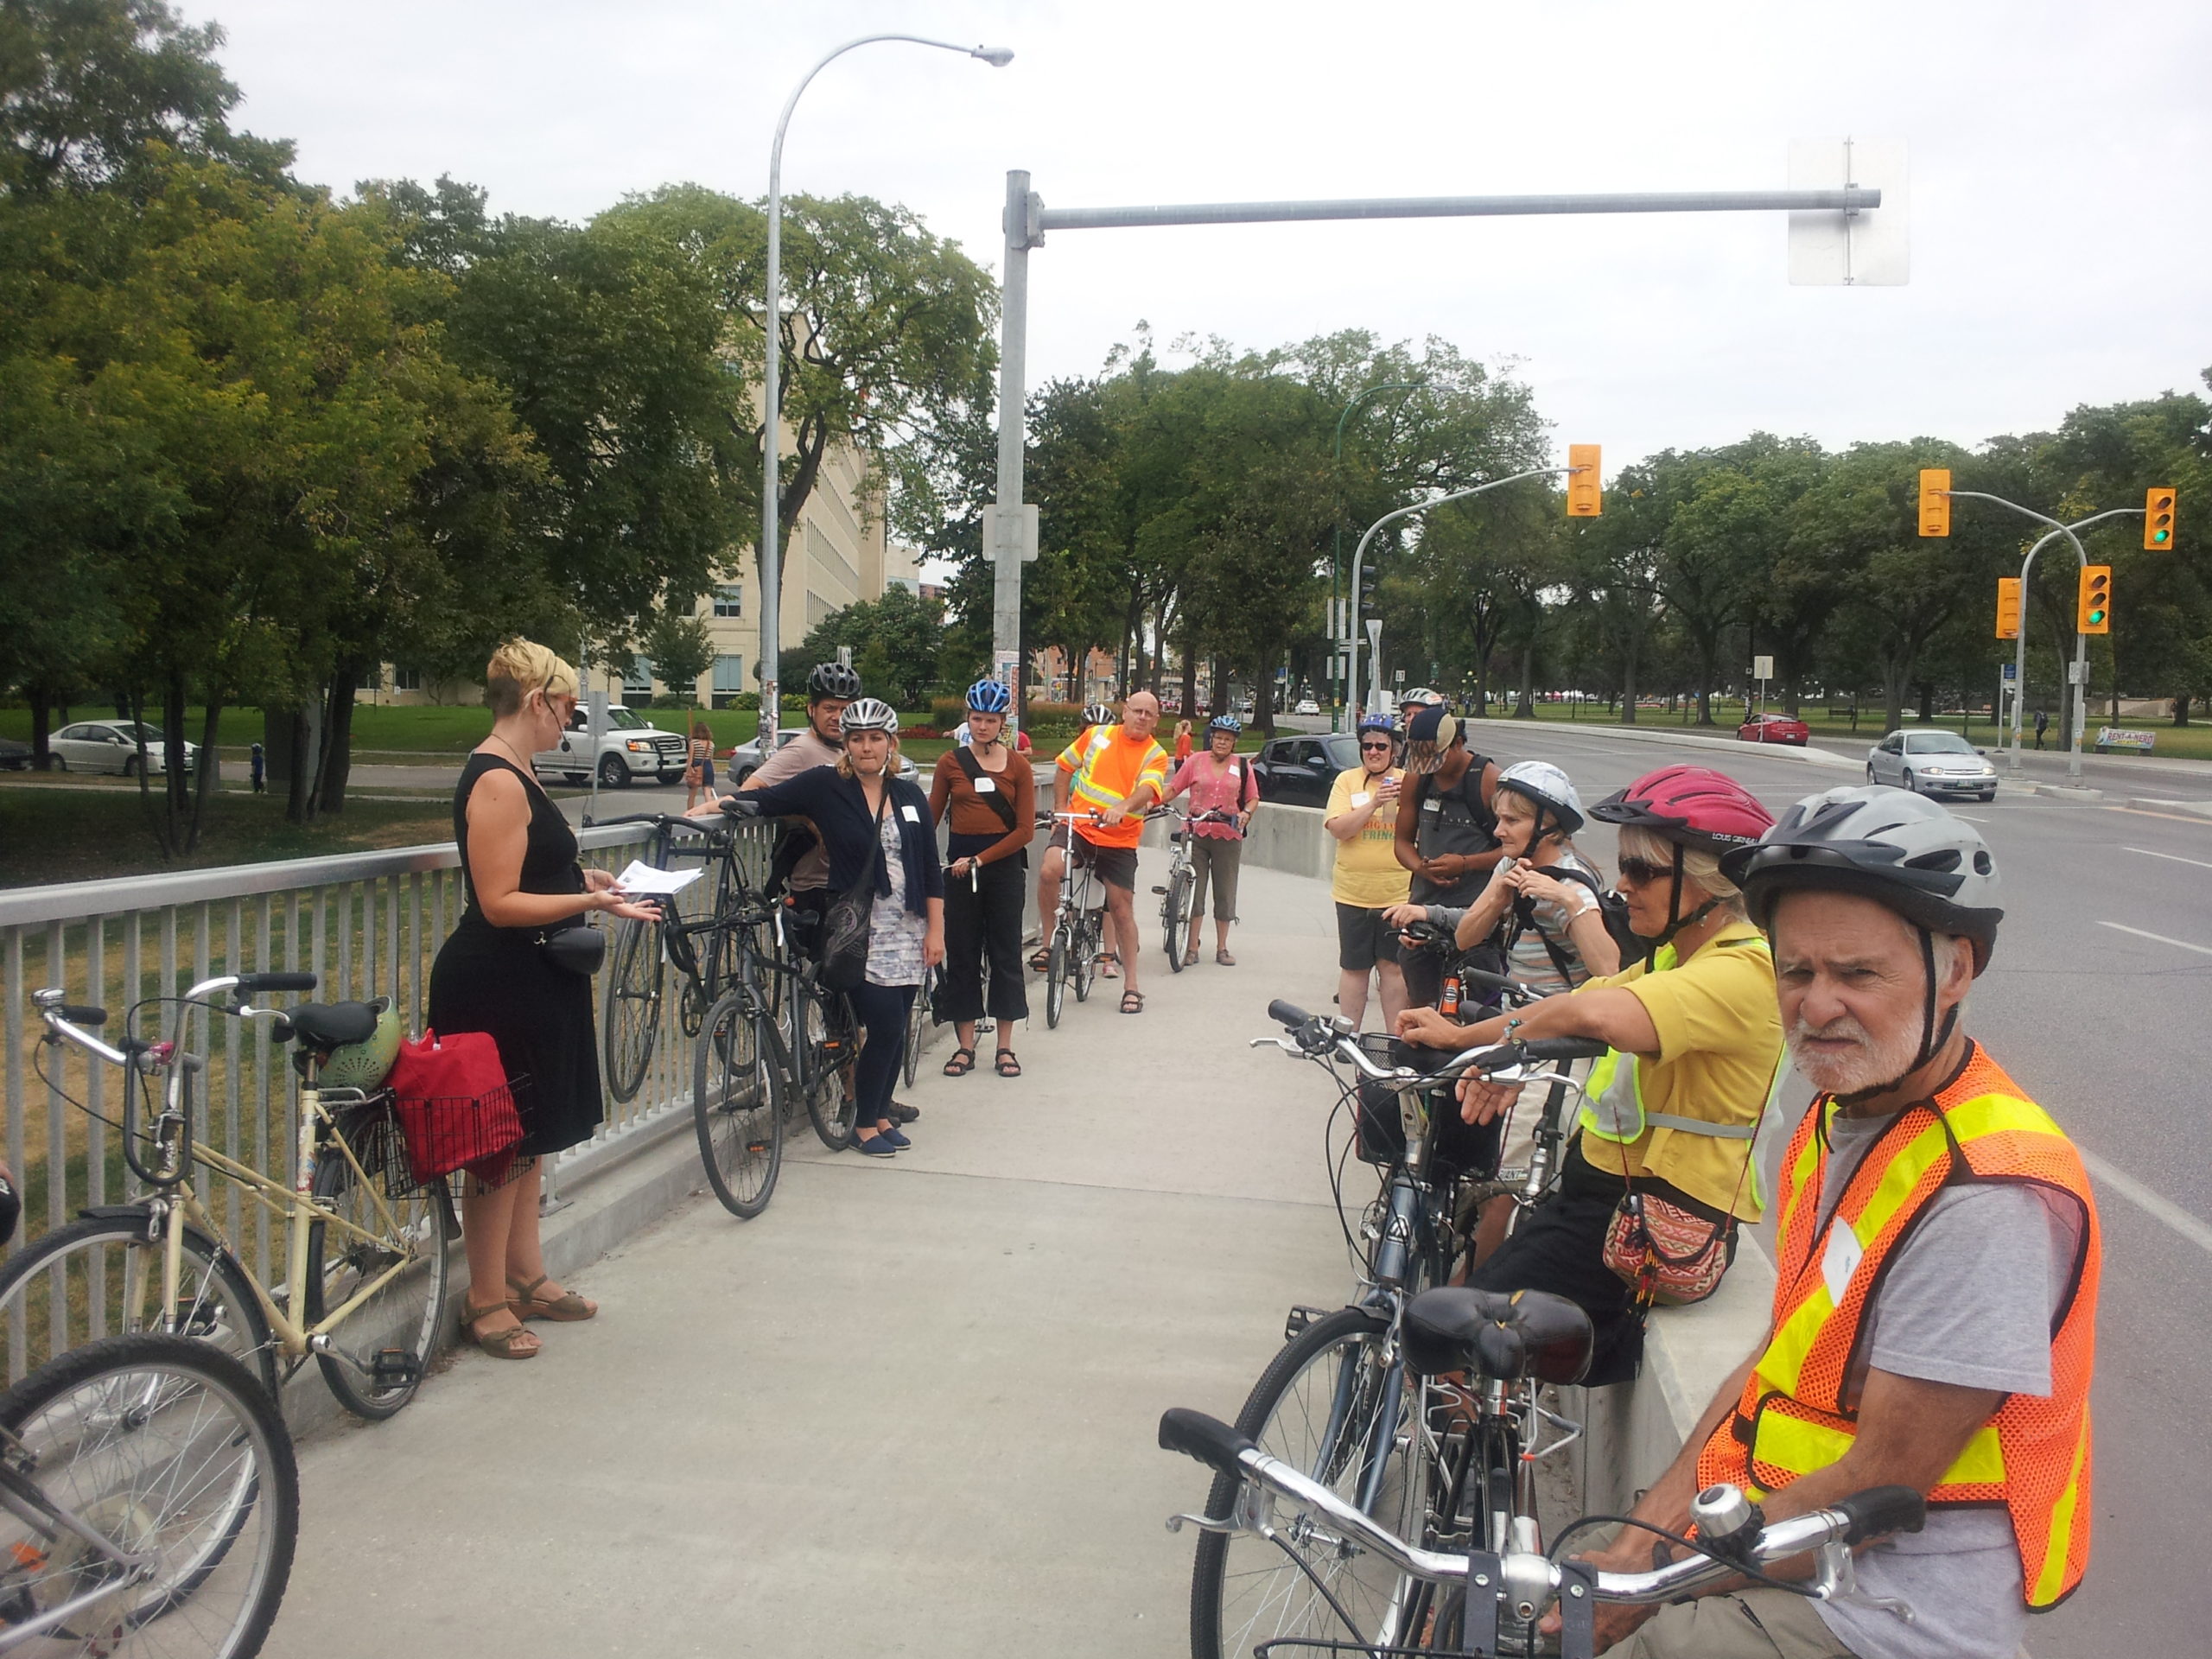 Cyclists learn about "From Here Until Now", a public art piece on the Osborne Bridge